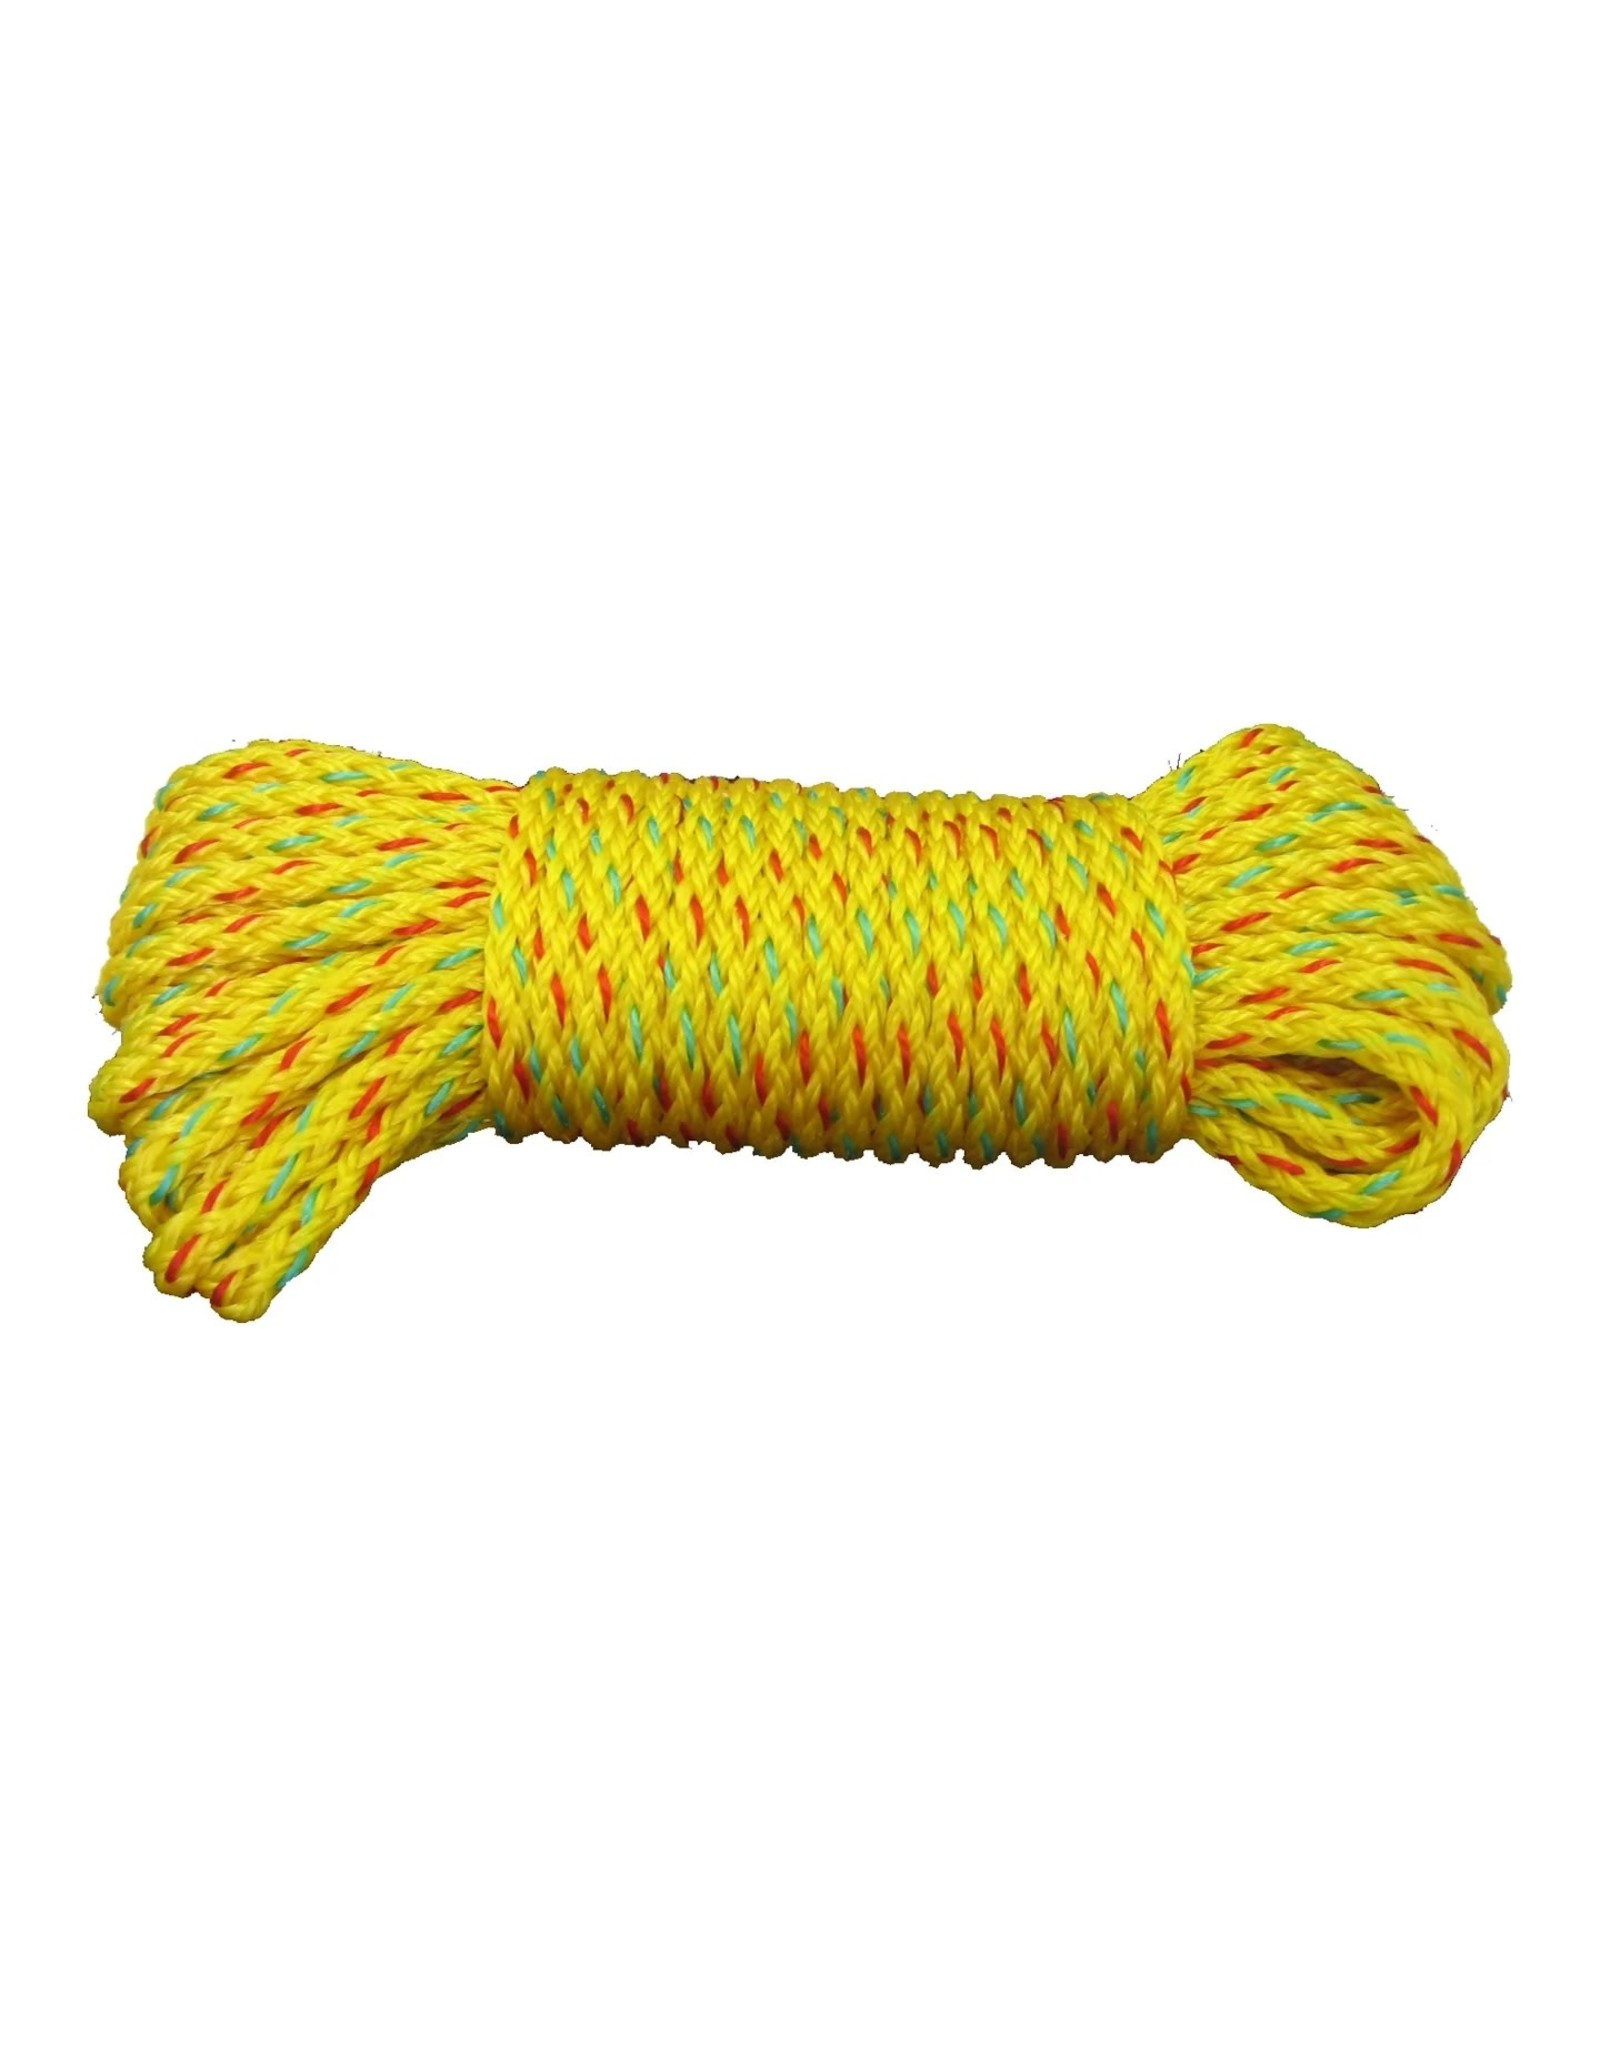 Promar Promar 75 FT, 1/2" Braided Lobster Rope - Yellow